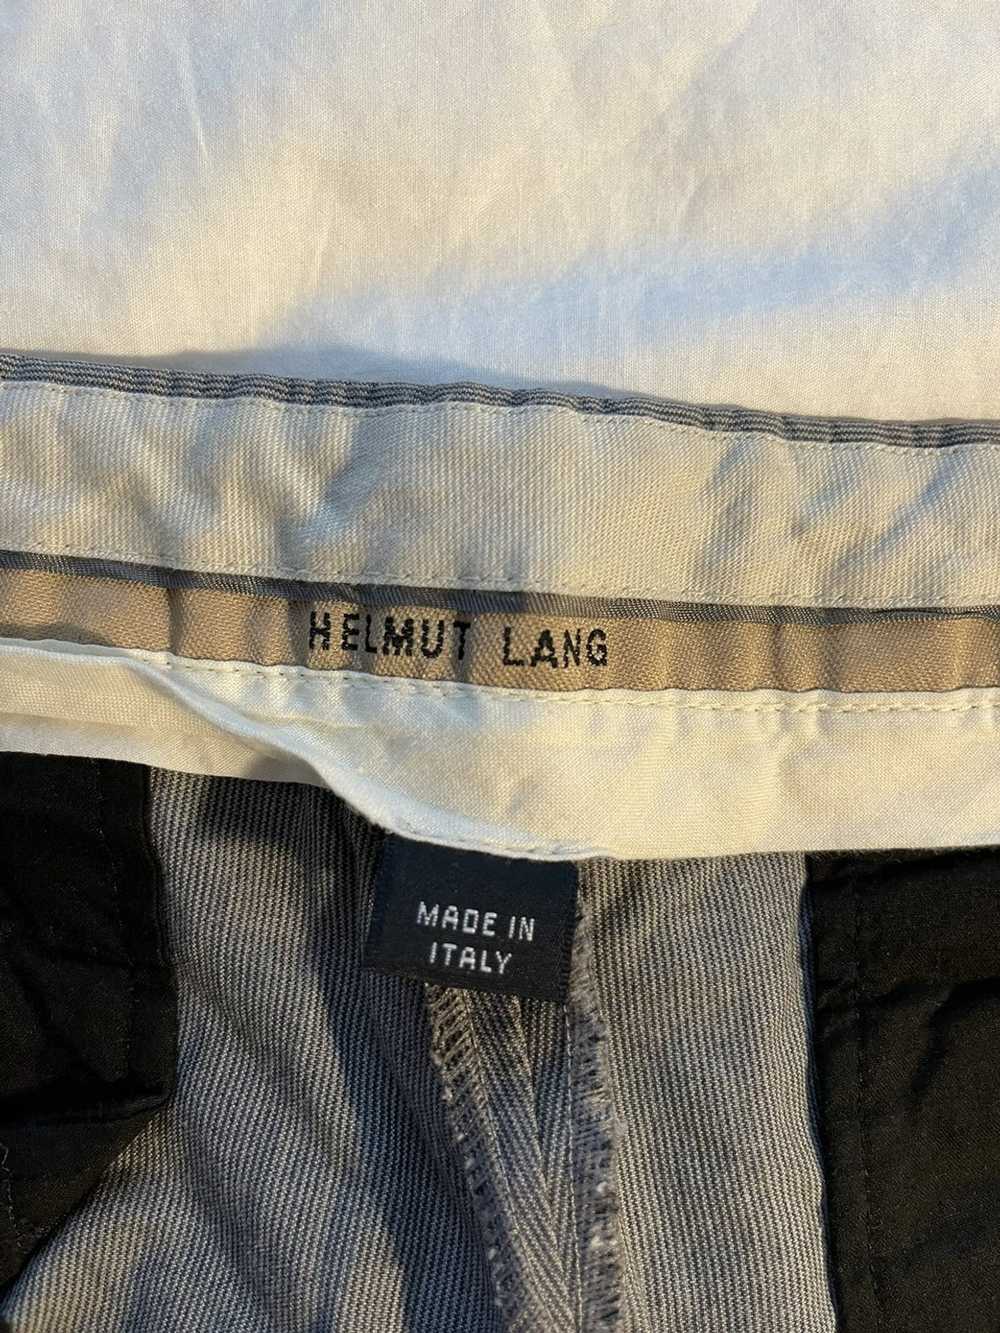 Helmut Lang Early 2000s Helmut Lang Trousers - image 3